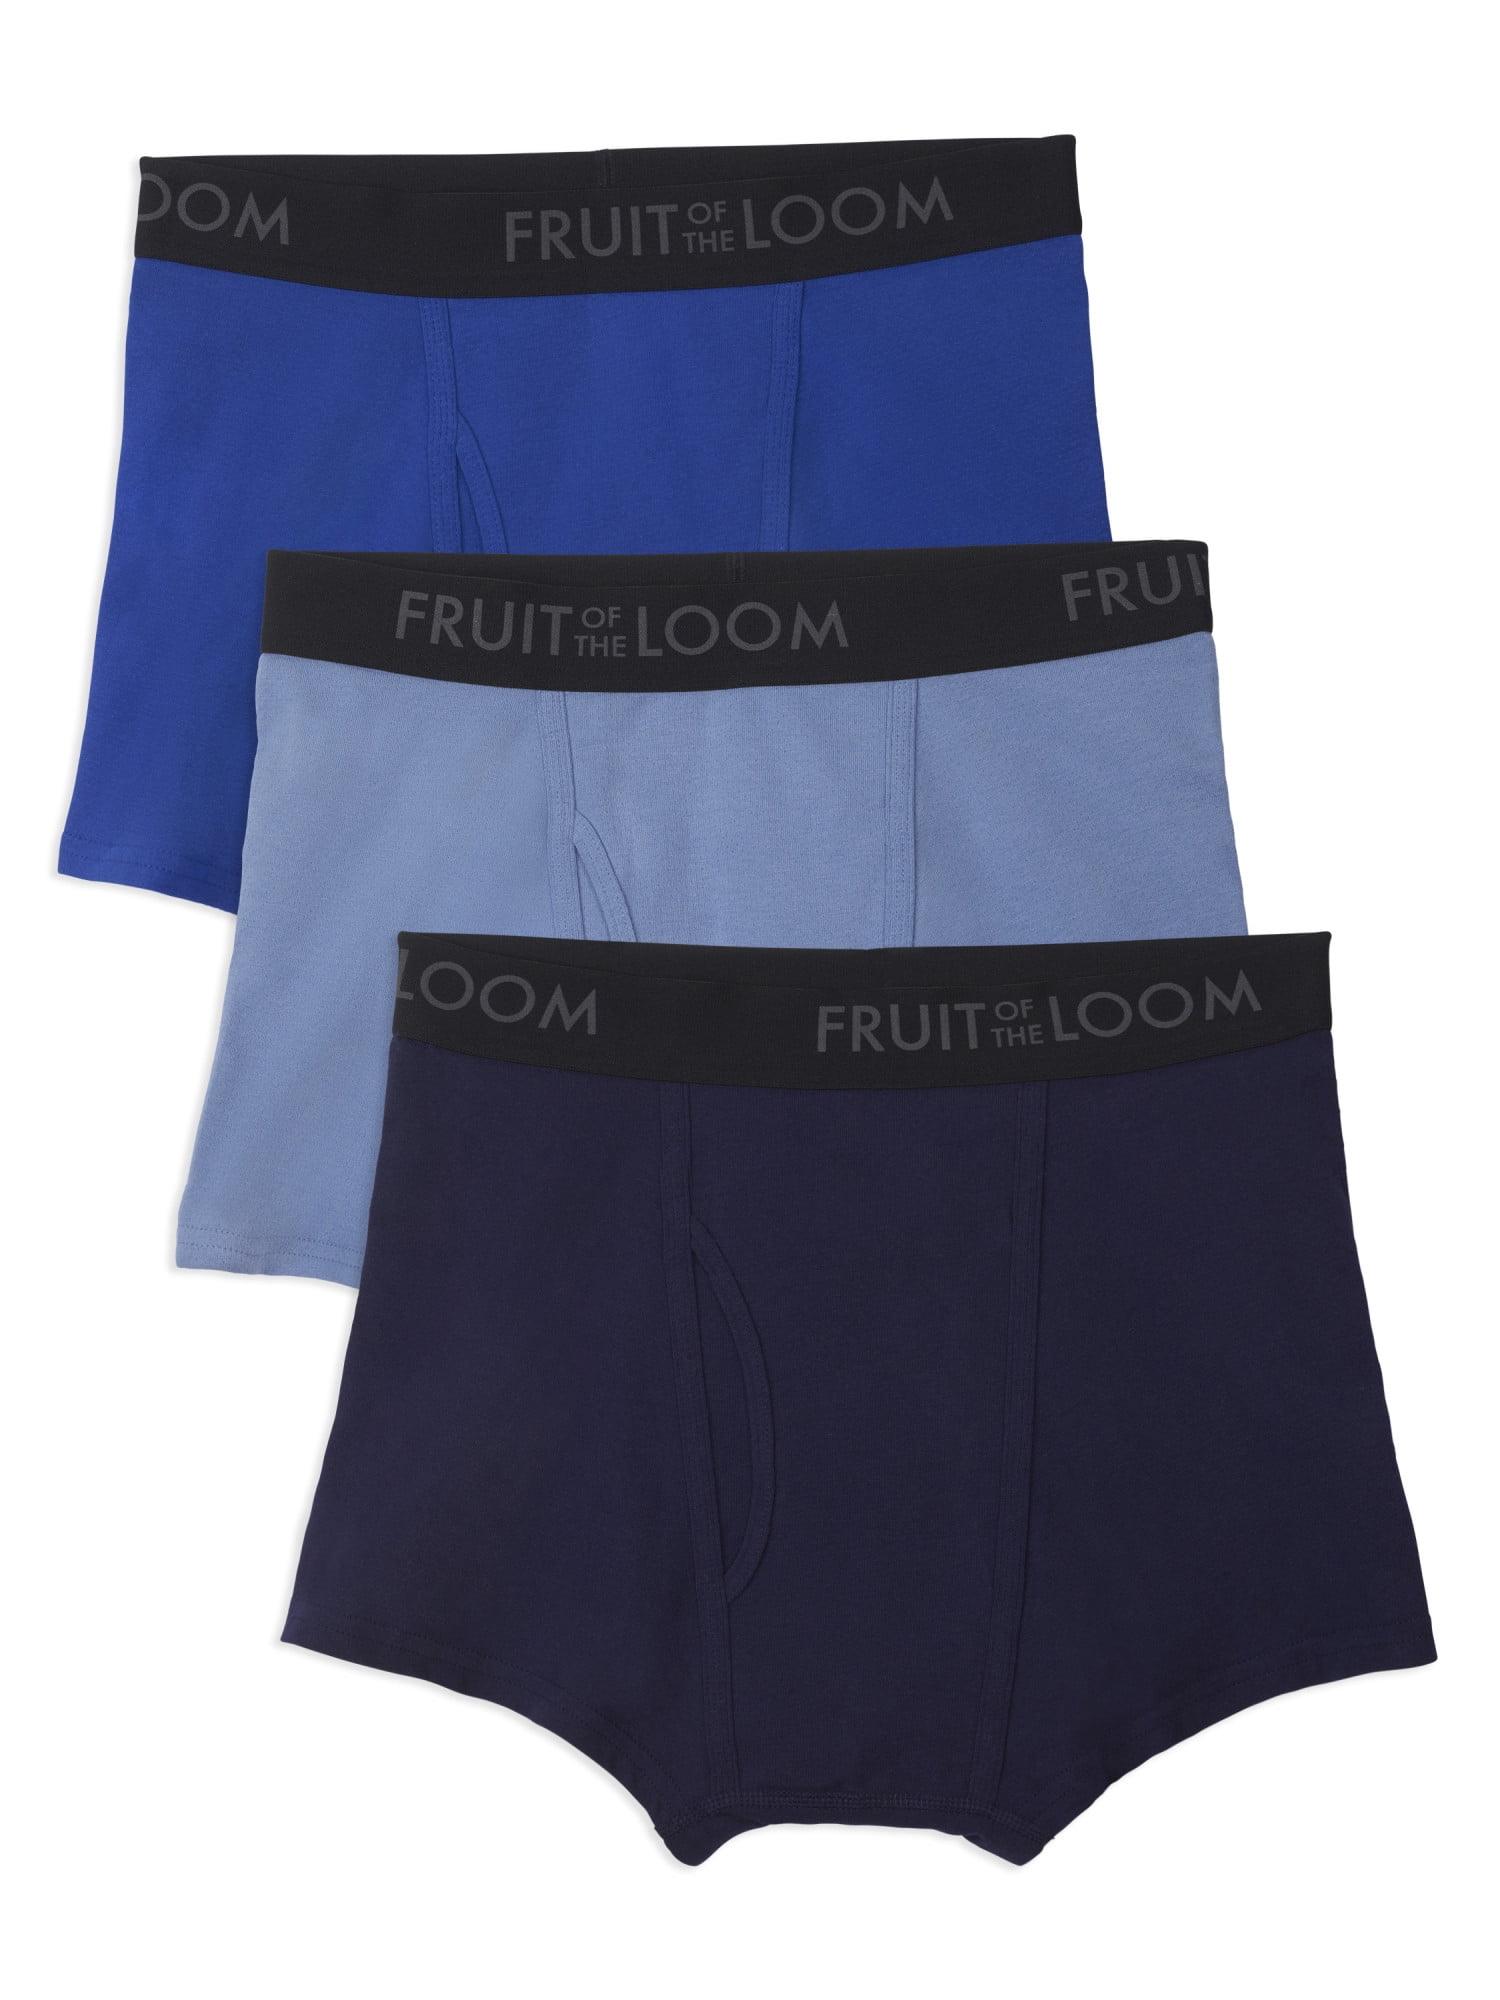 Fruit of the Loom Mens 2Pack Assorted Boxer Briefs 100% Cotton Underwear 2XL